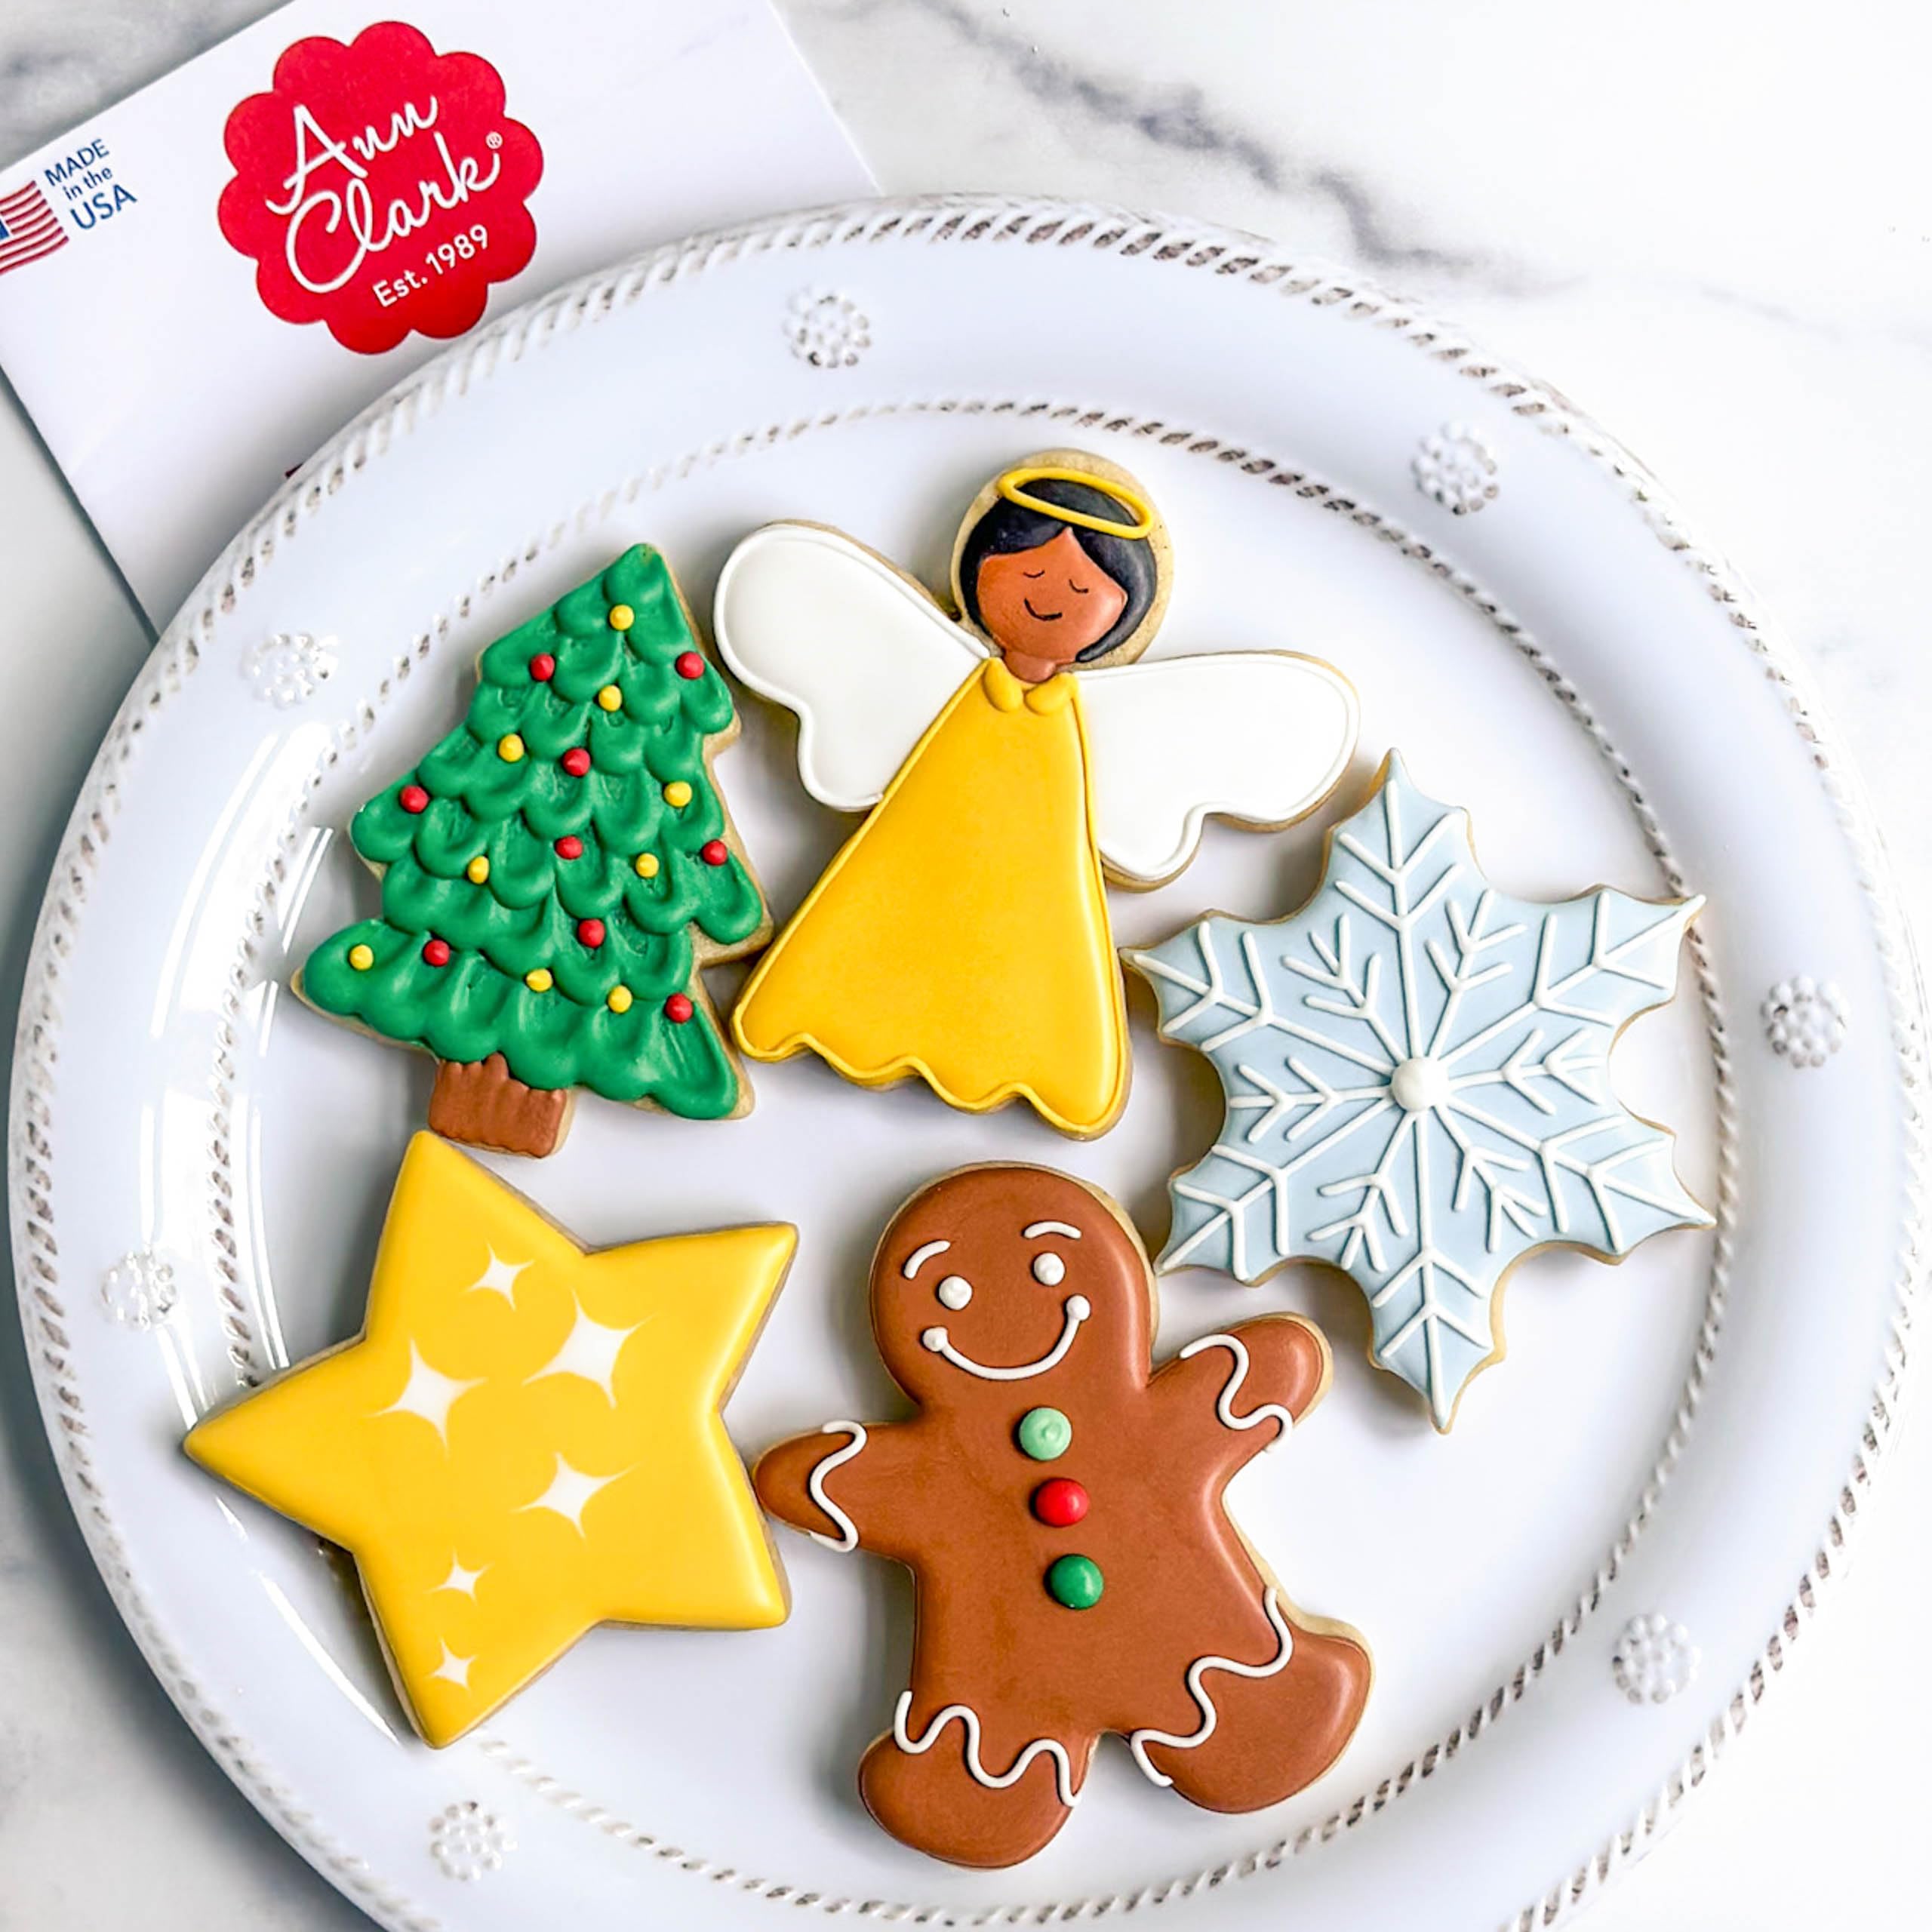 Christmas and Holiday Cookie Cutters 5-Pc Set Made in USA by Ann Clark, Gingerbread Man, Christmas Tree, Star, Snowflake, Angel